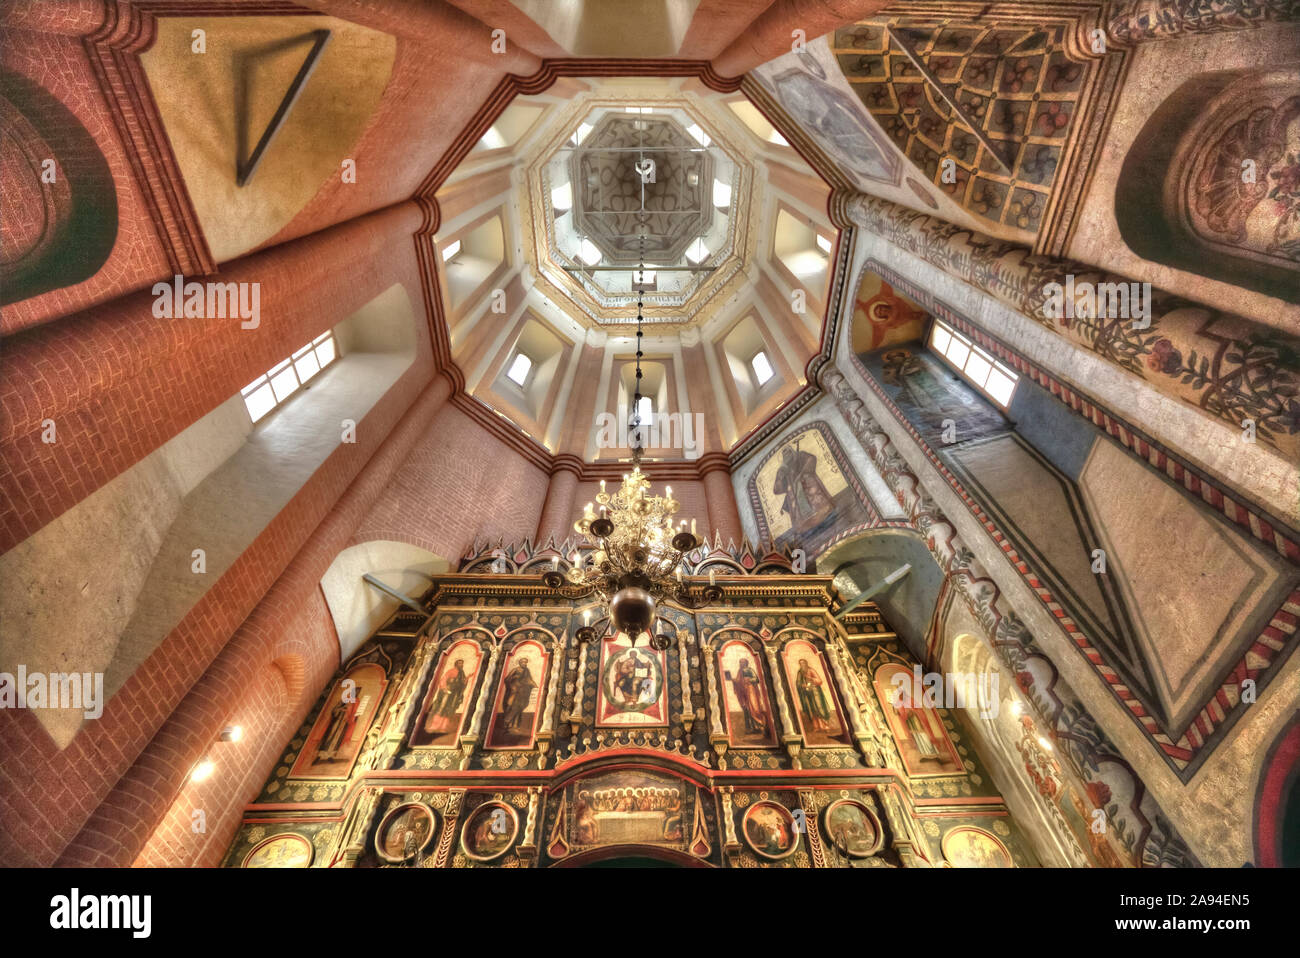 St Basil's Cathedral, interior view of dome and altar; Moscow, Russia Stock Photo